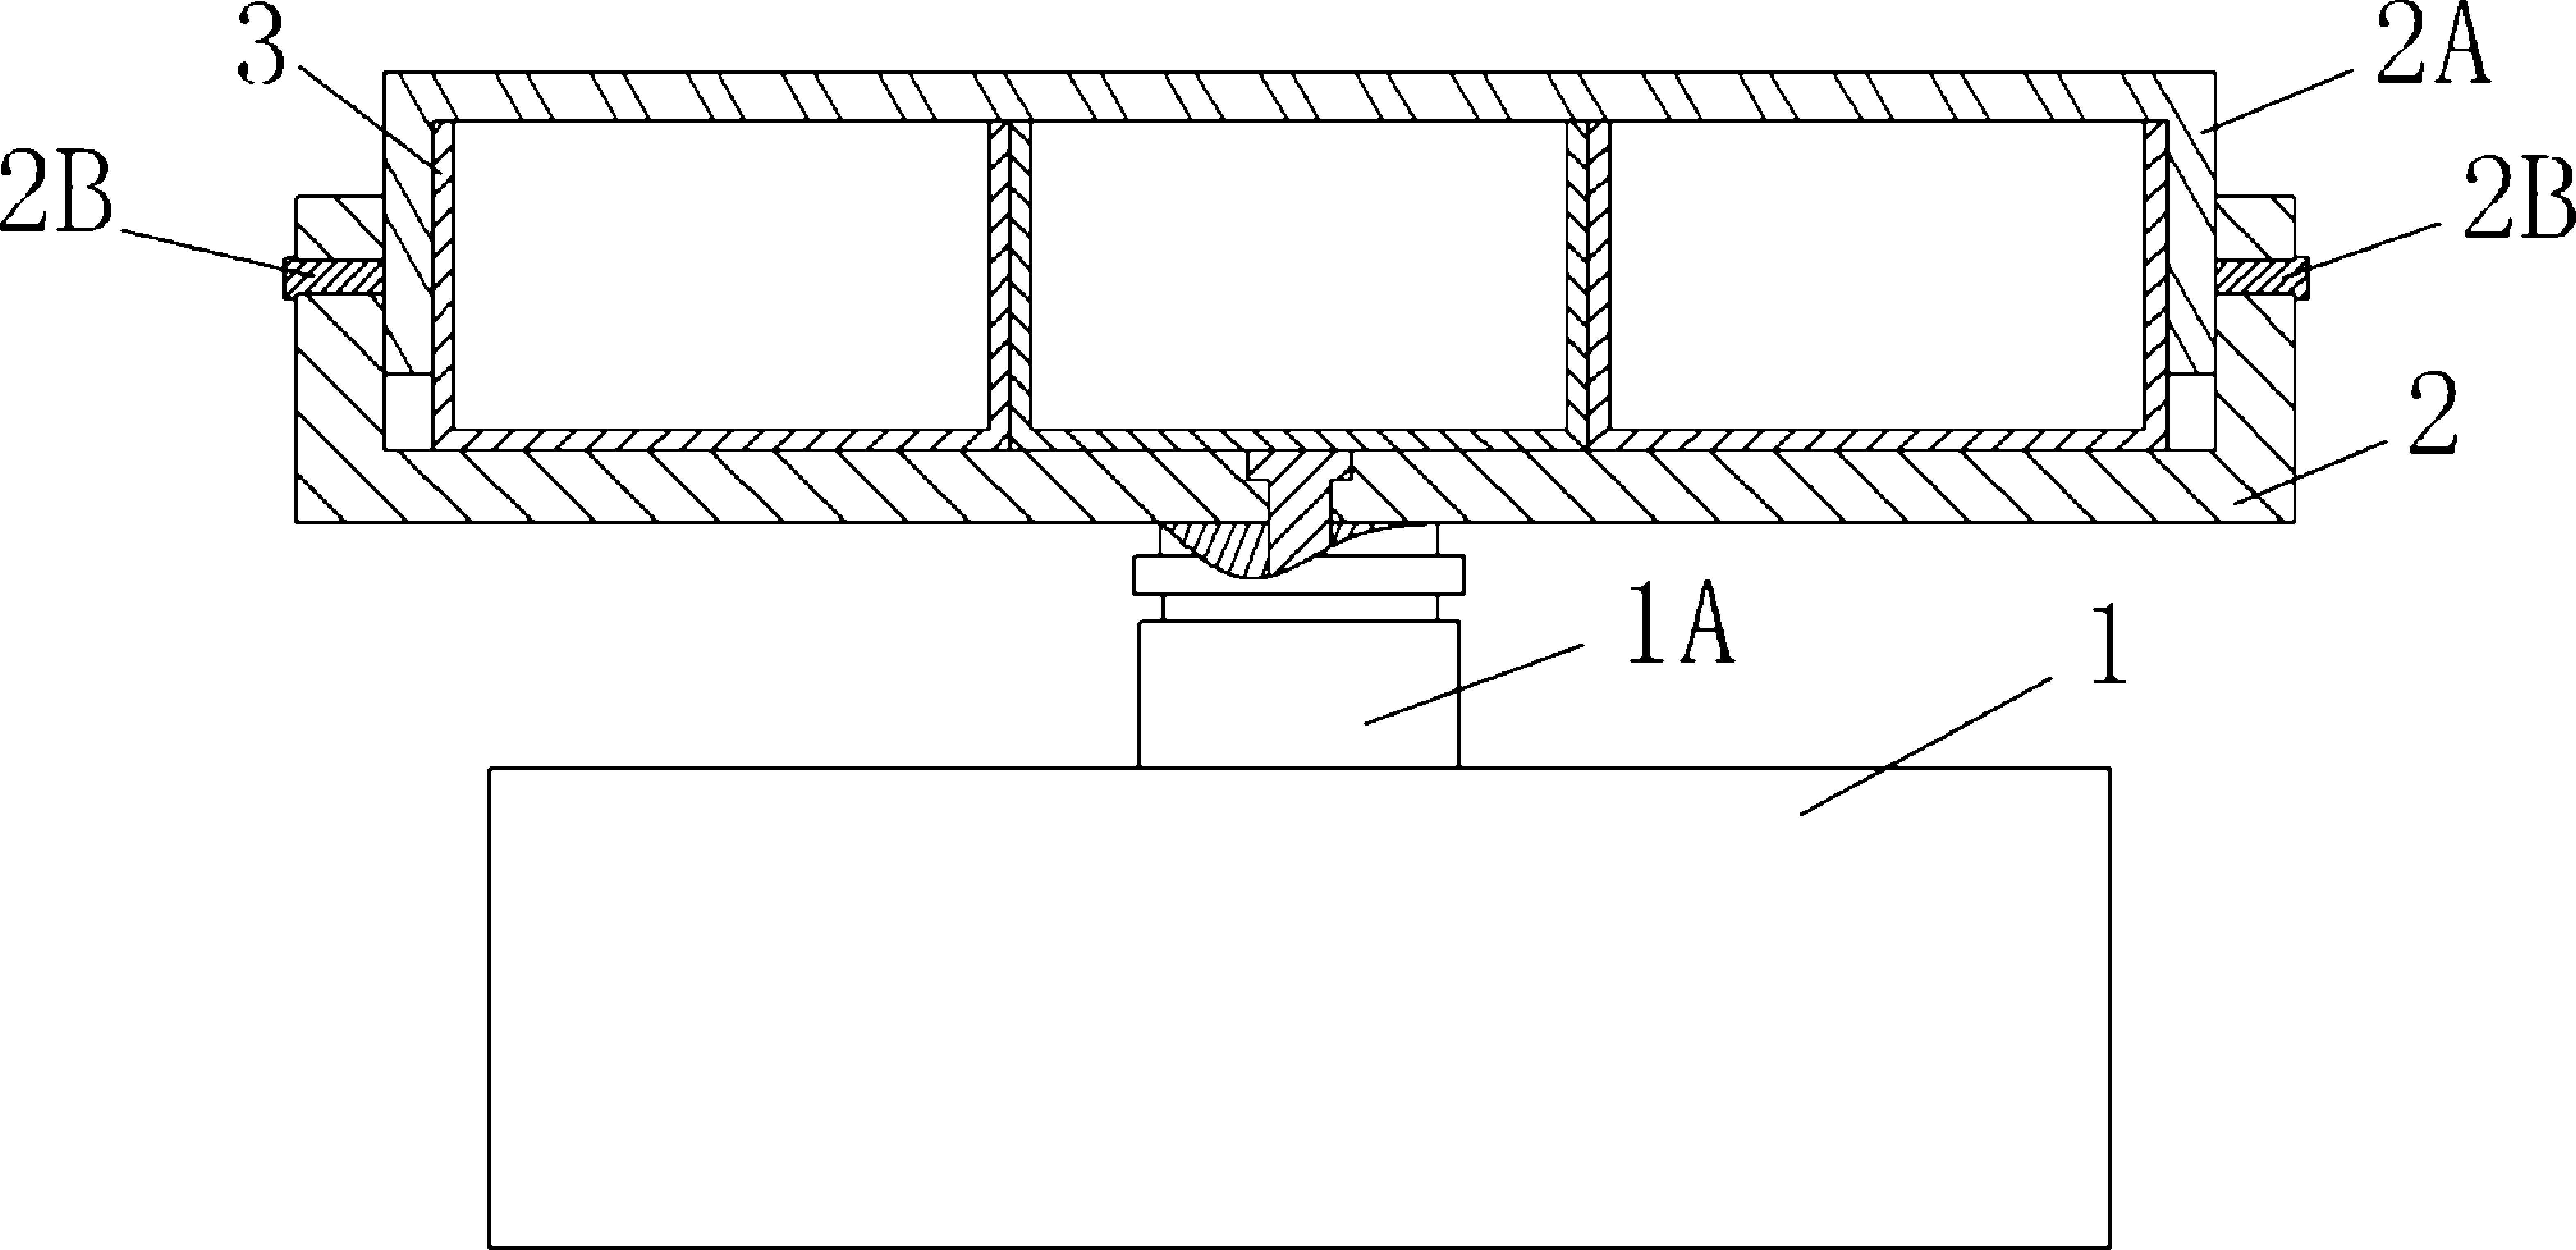 Microvibration loading device for bone formation related cells